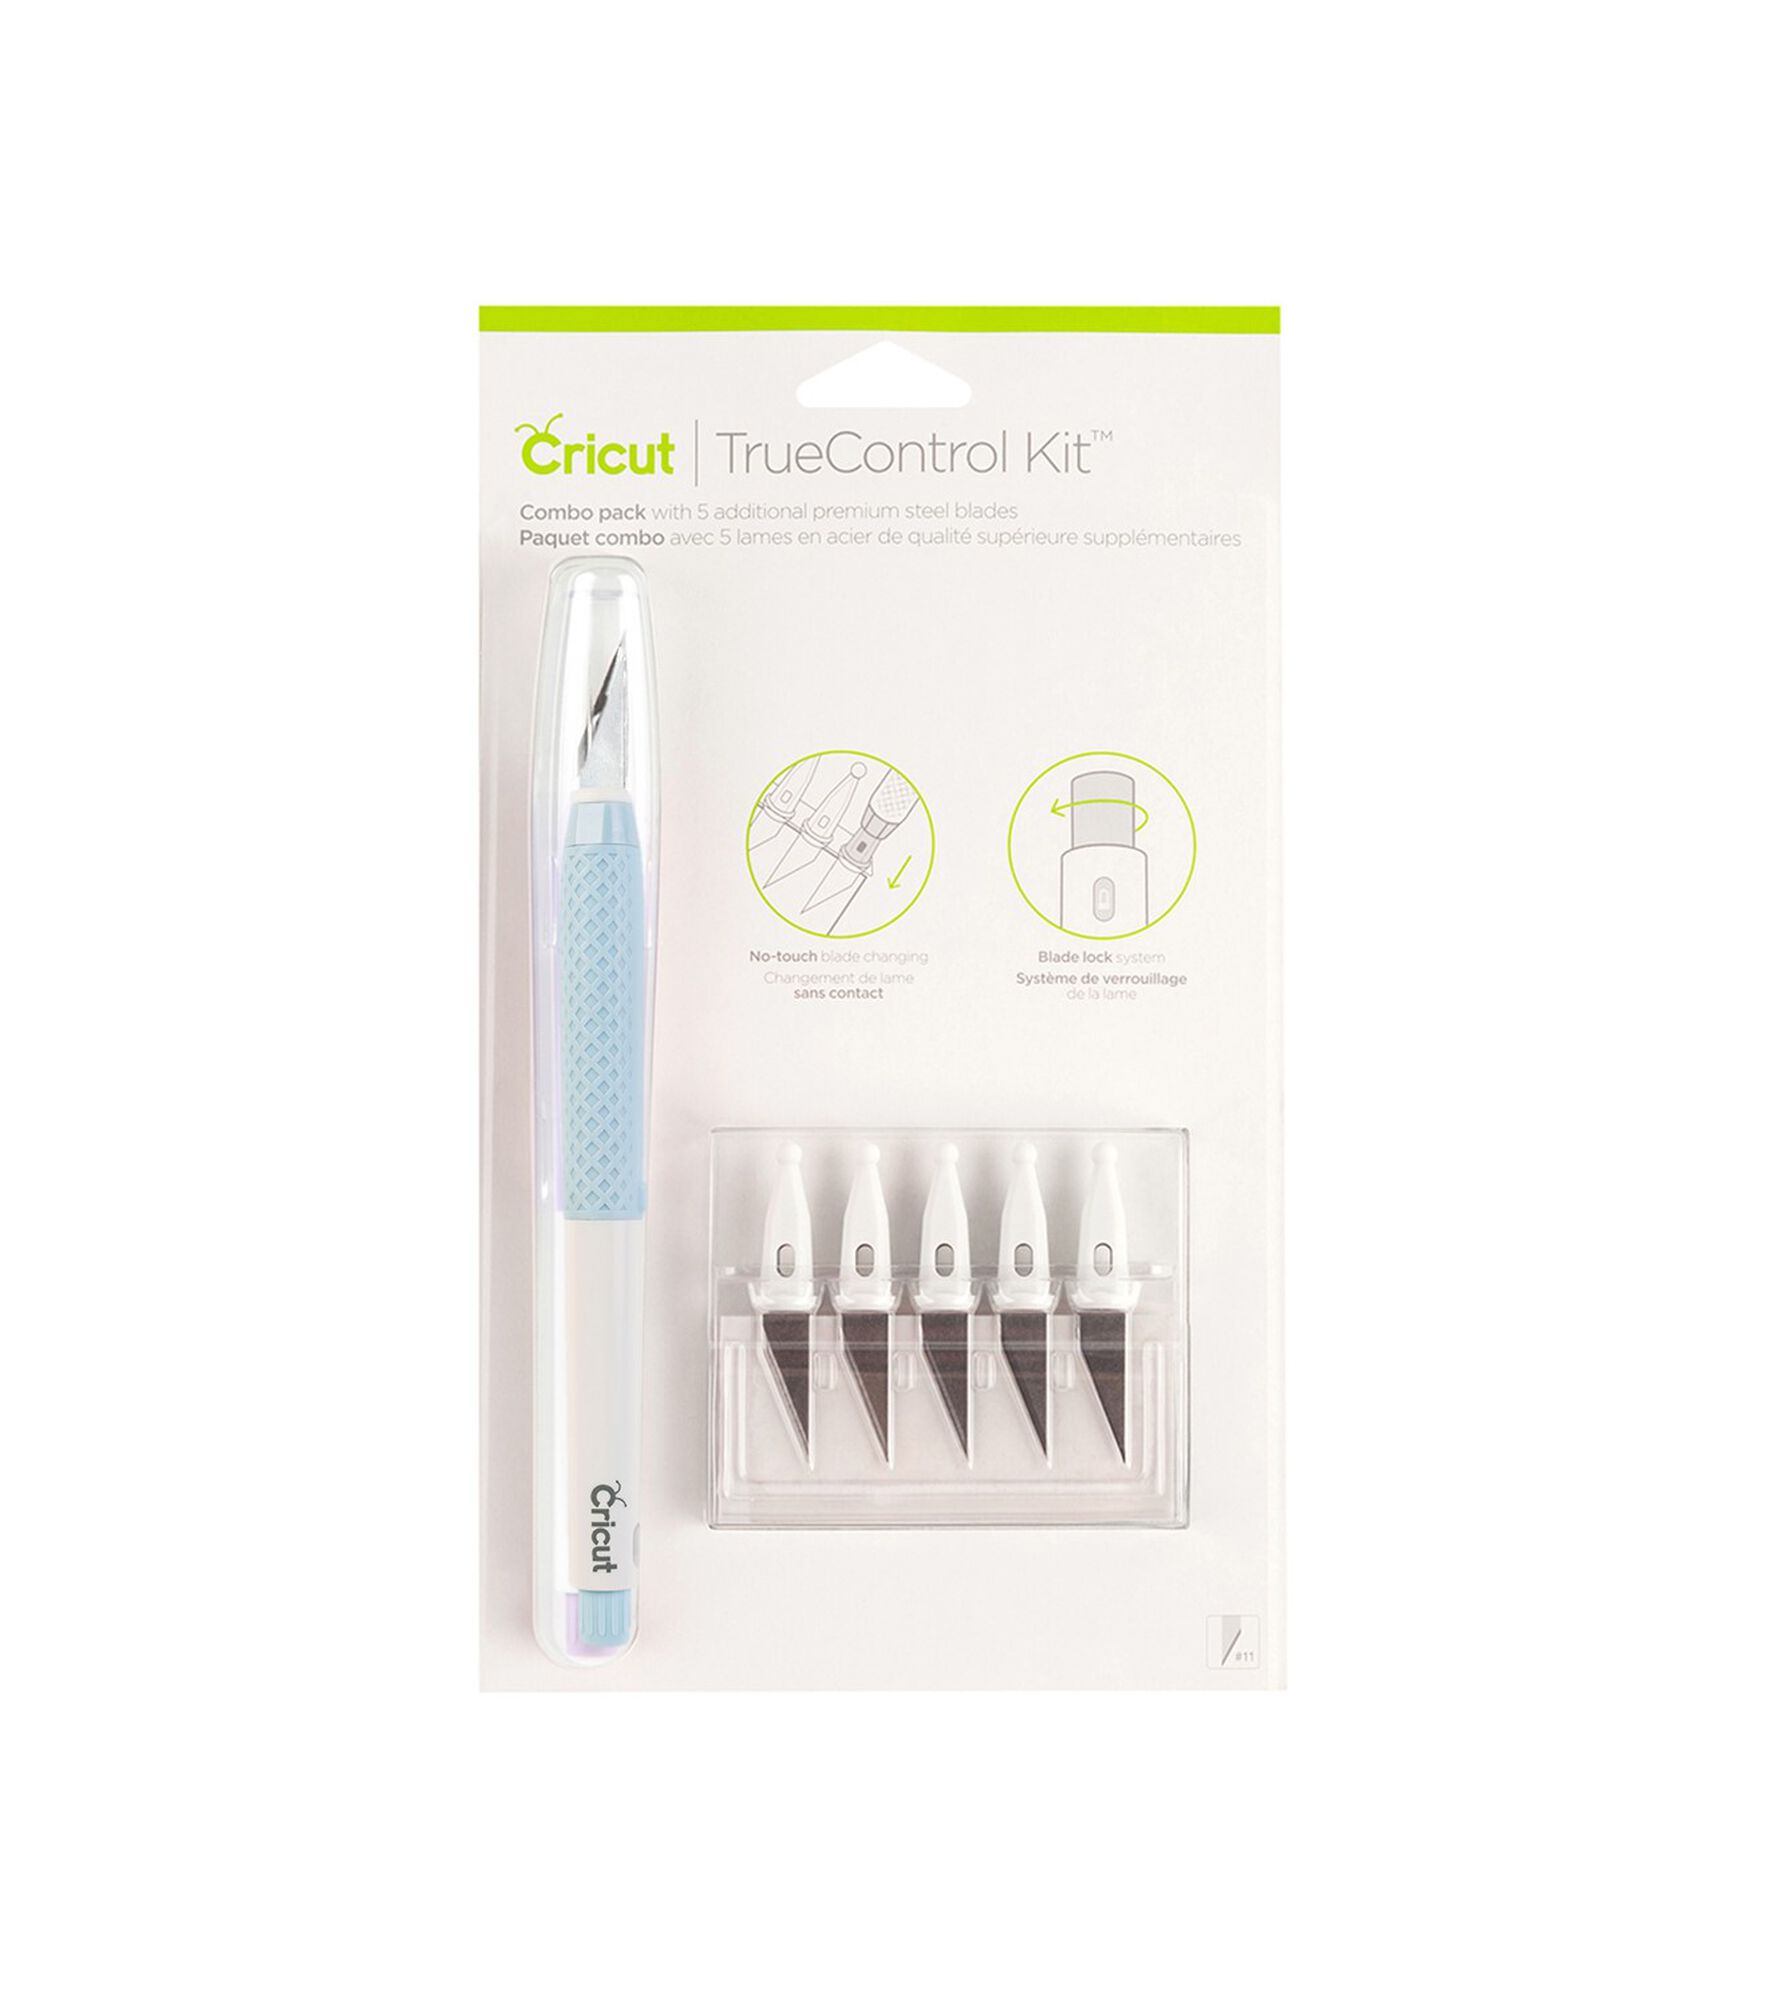 Cricut Blades Combo Box of 5 Replacement Blades. 